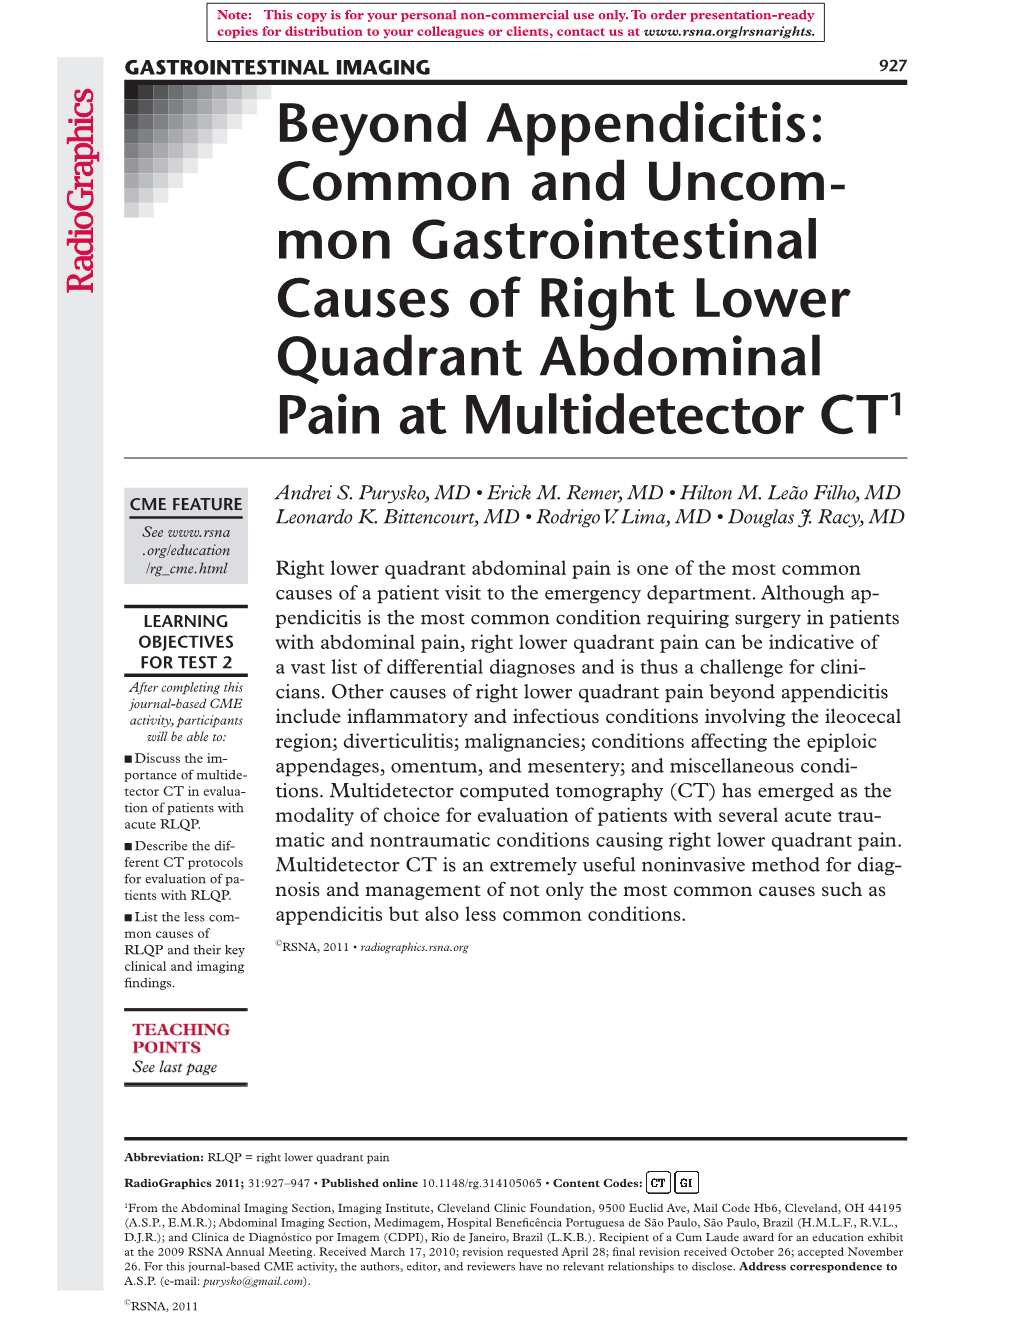 Mon Gastrointestinal Causes of Right Lower Quadrant Abdominal Pain at Multidetector CT1